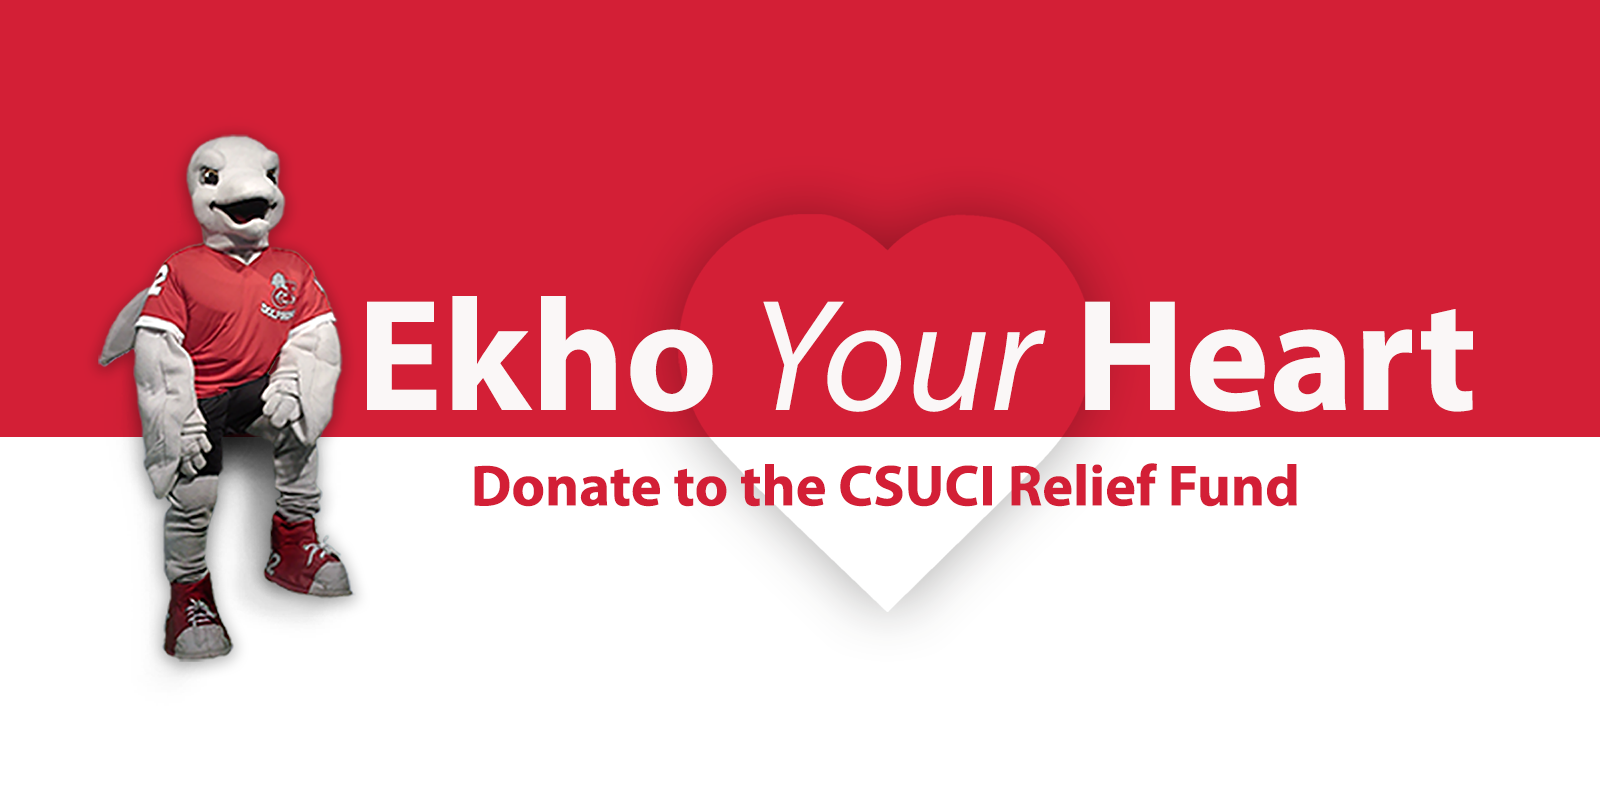 Ekho Your Heart: Donate to the CSUCI Relief Fund